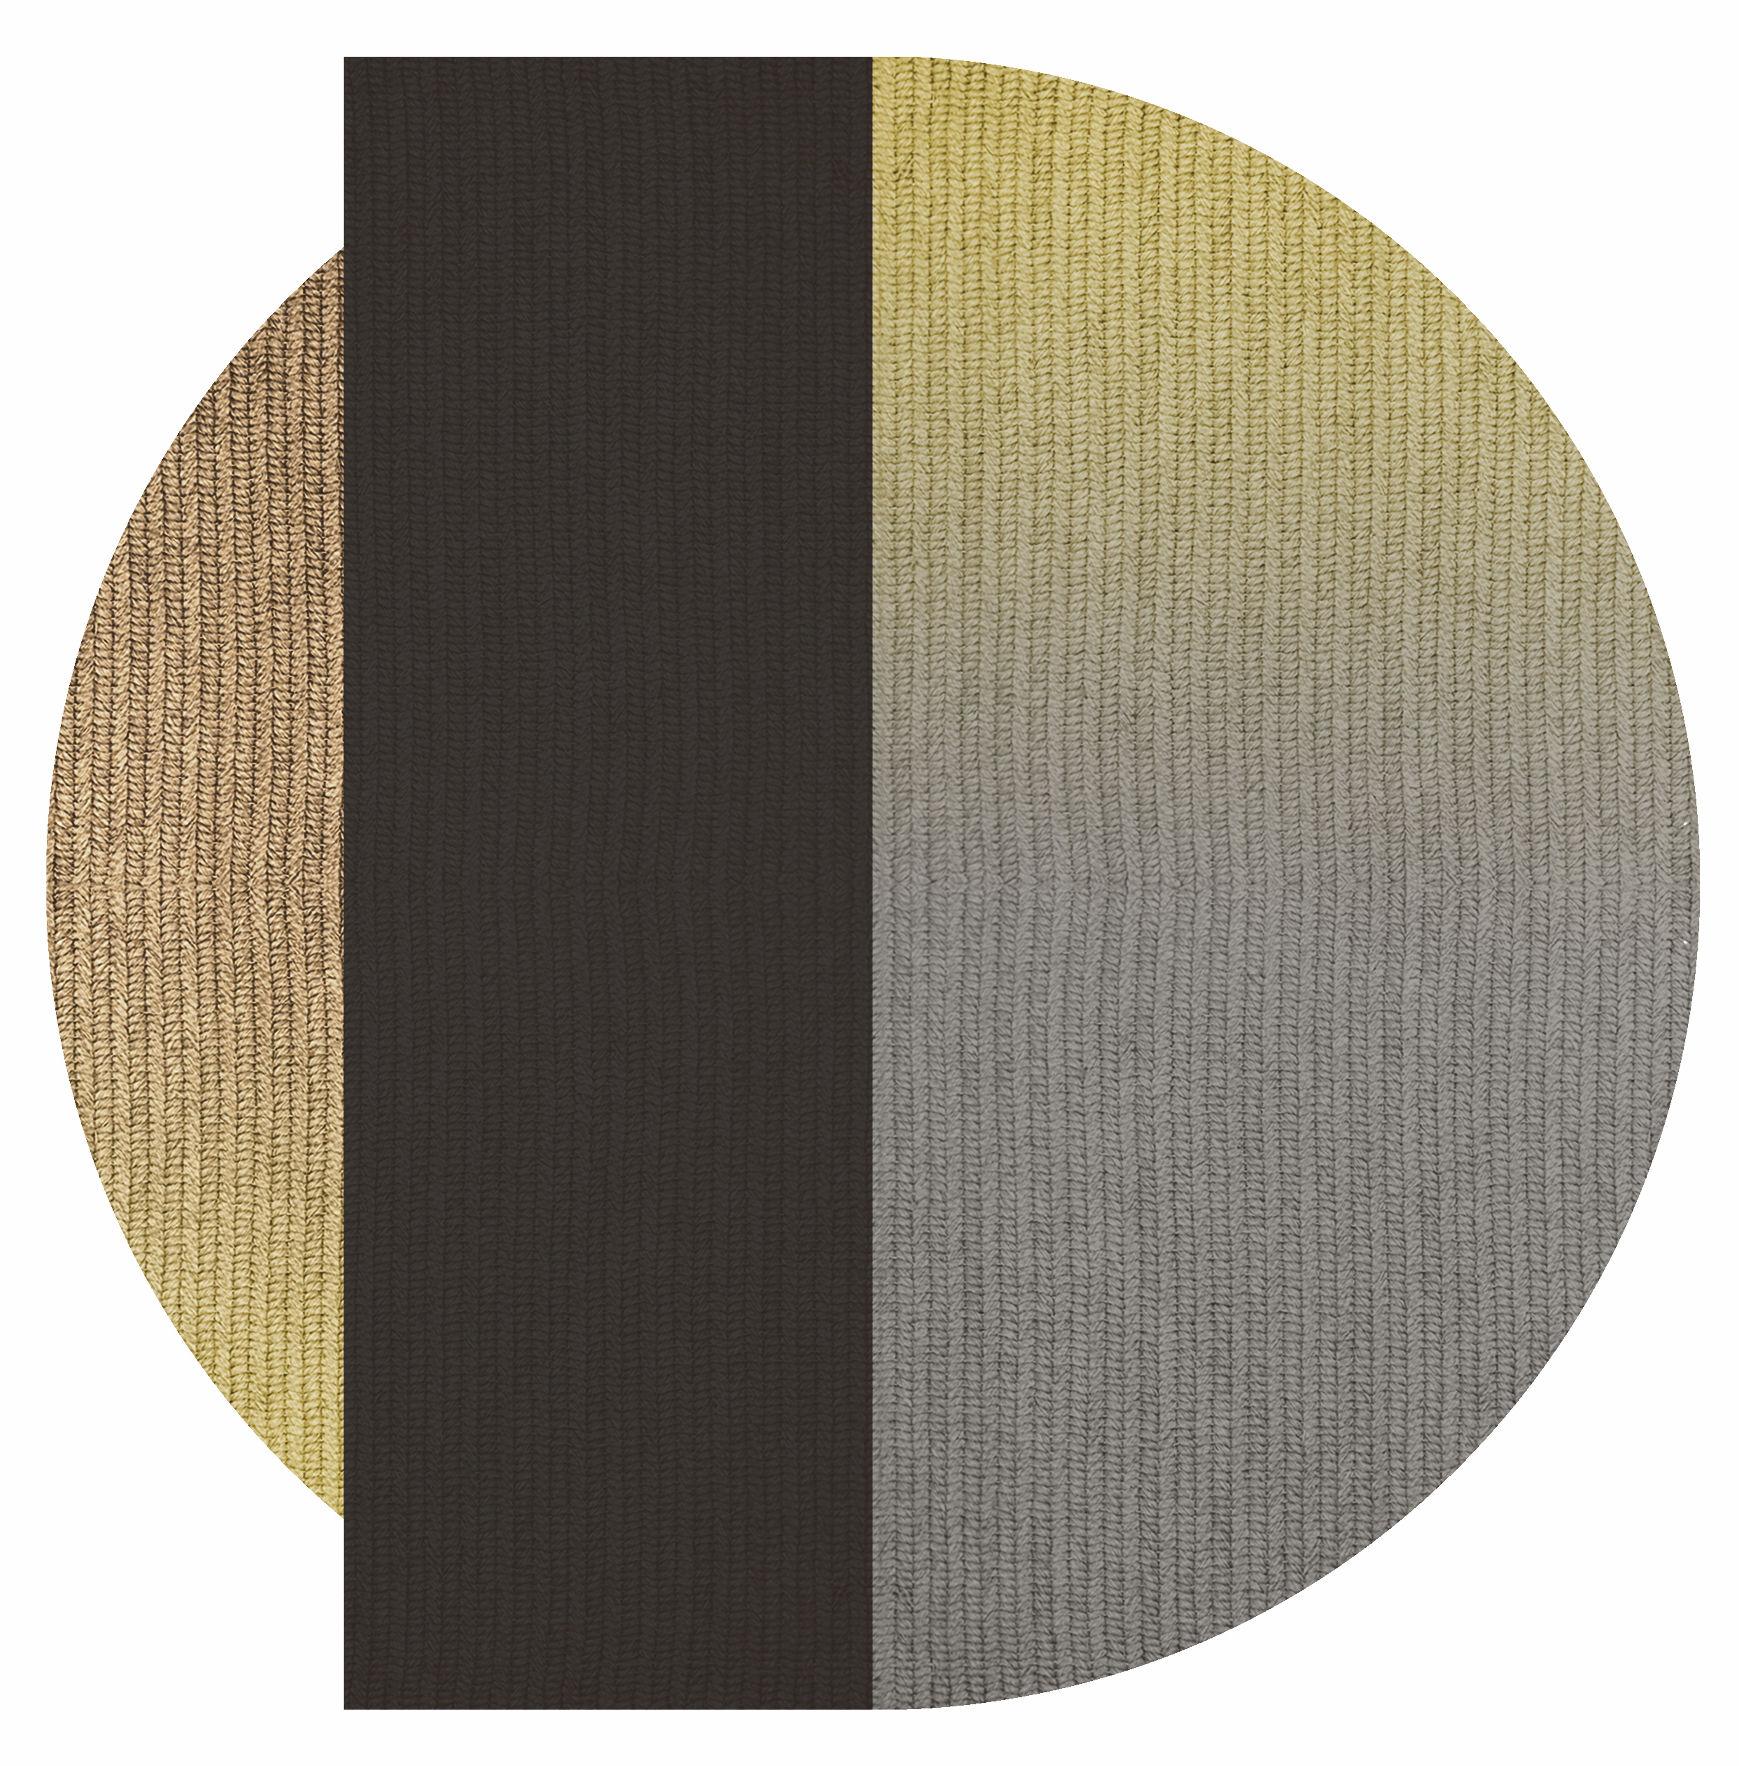 Philippine 'Flux' Rug in Abaca, Colour 'Pampas', Ø 200cm by Claire Vos for Musett Design For Sale